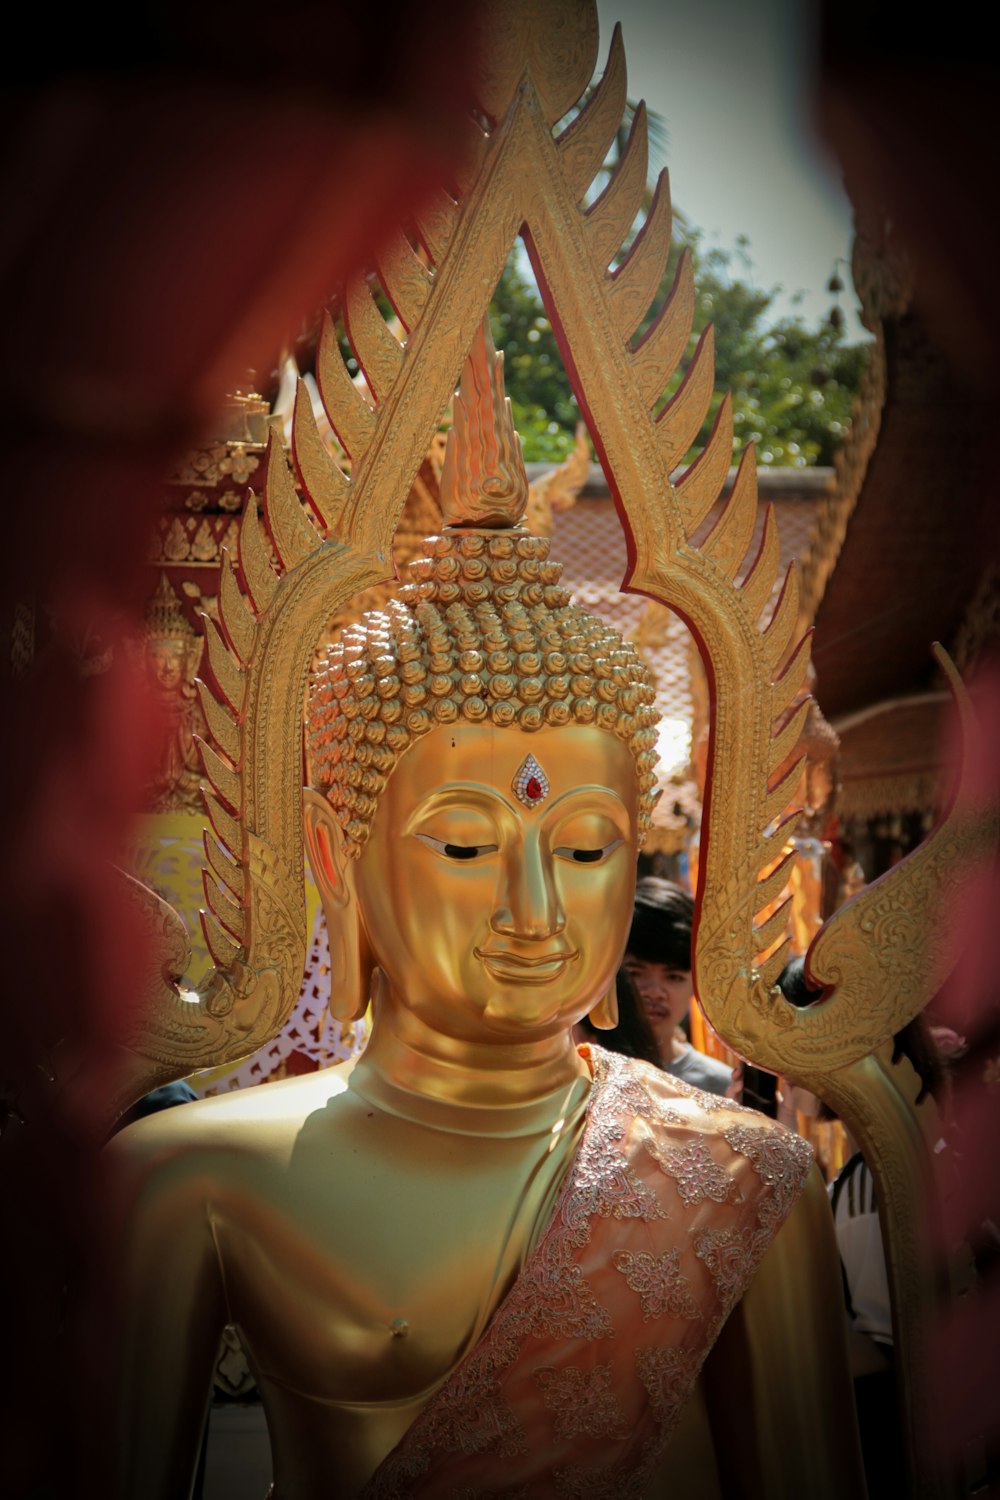 a golden buddha statue sitting in front of a building